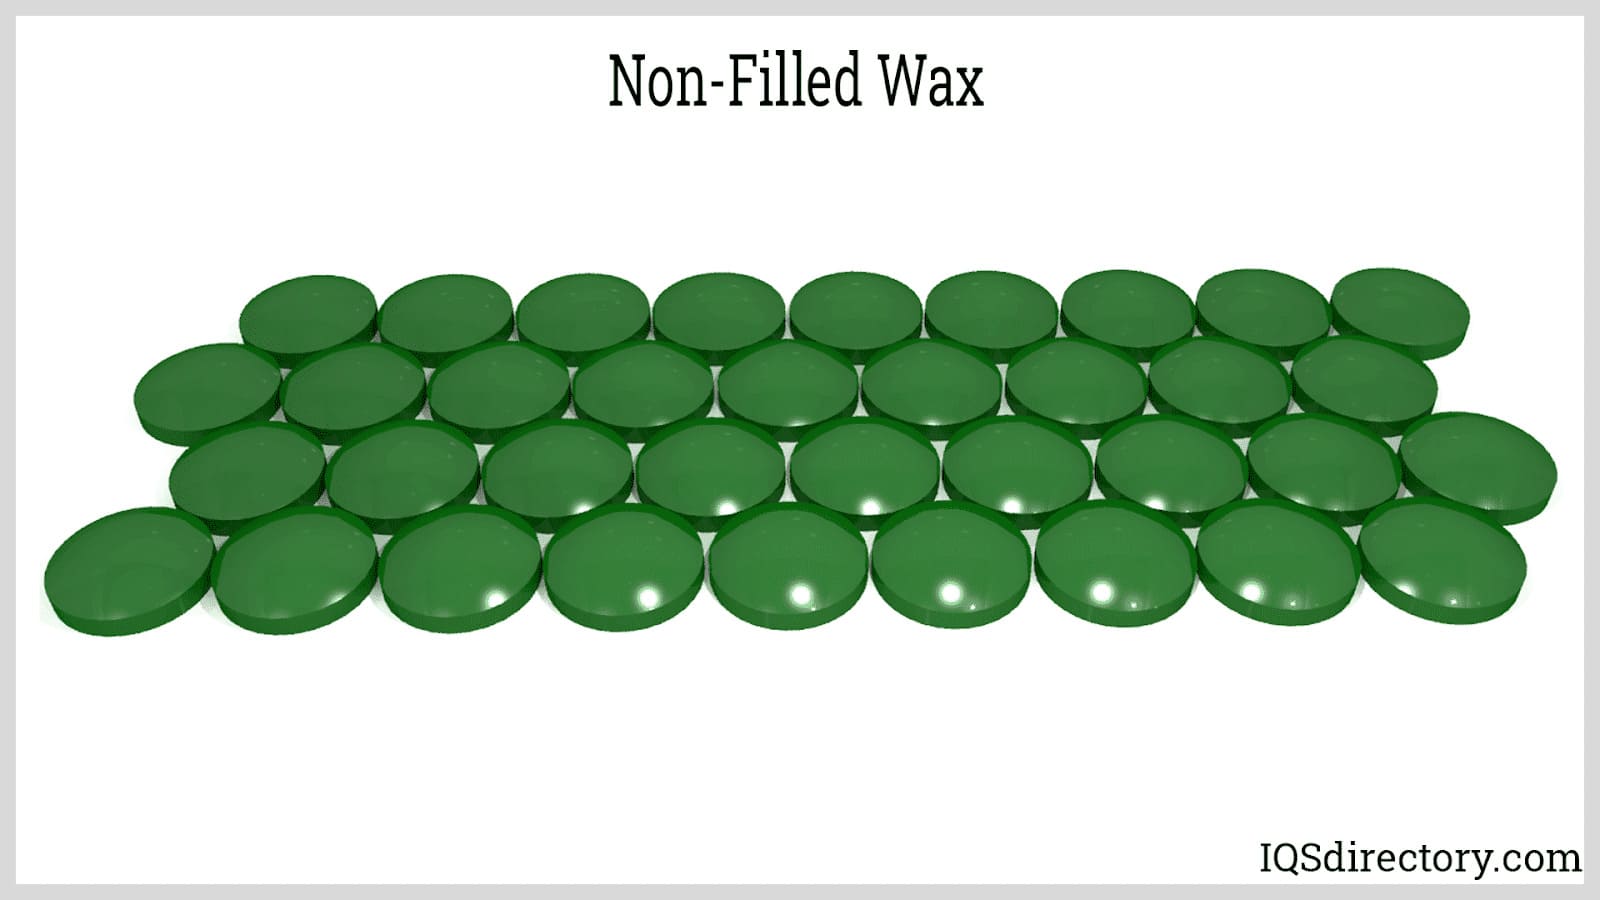 Non-Filled Wax